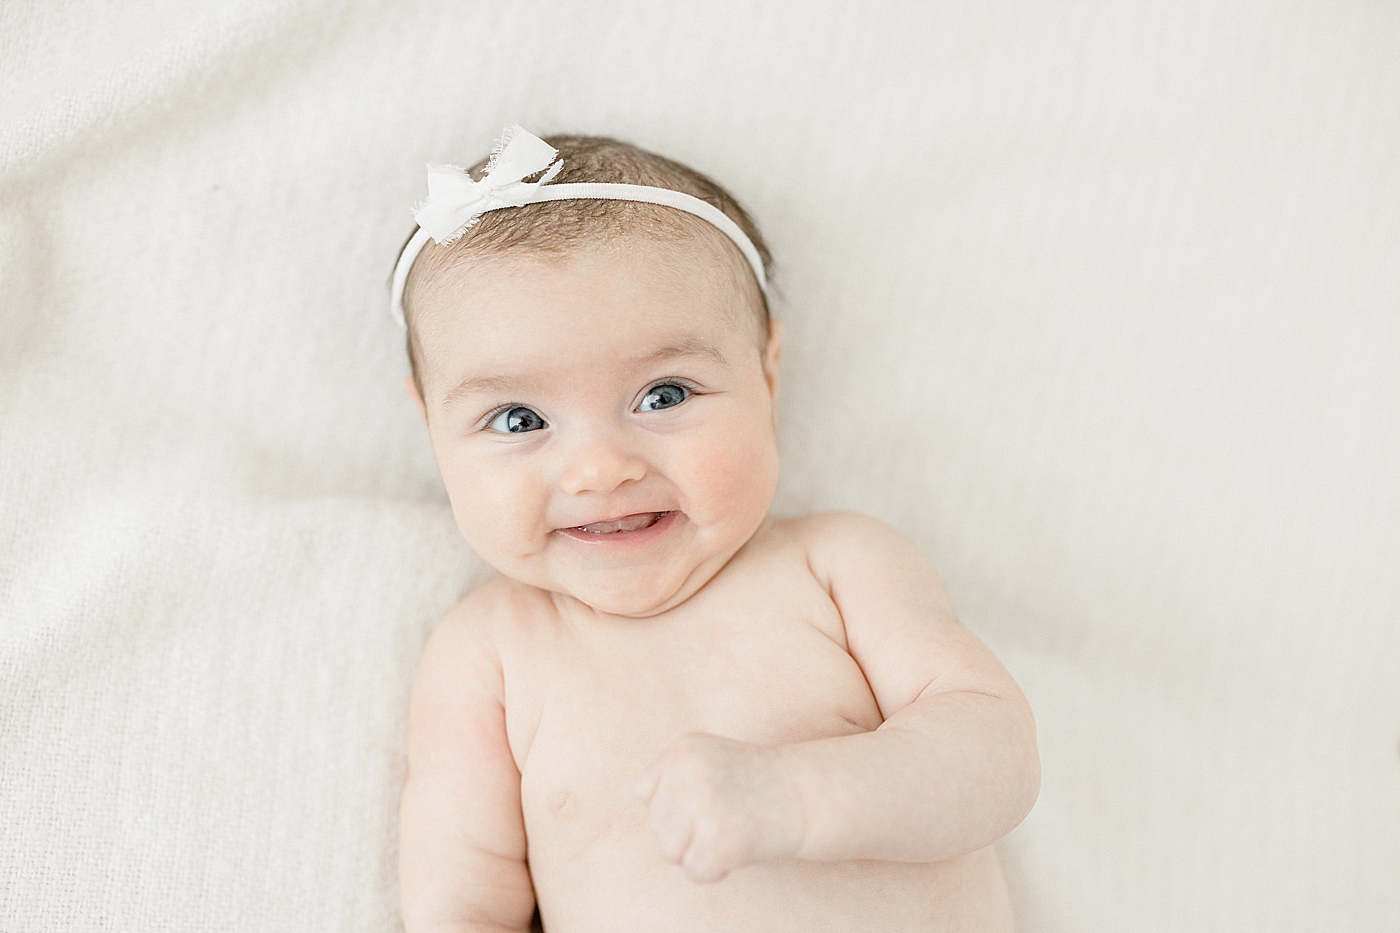 3 month milestone simplicity session in studio for baby girl. Photo by Brittany Elise Photography.